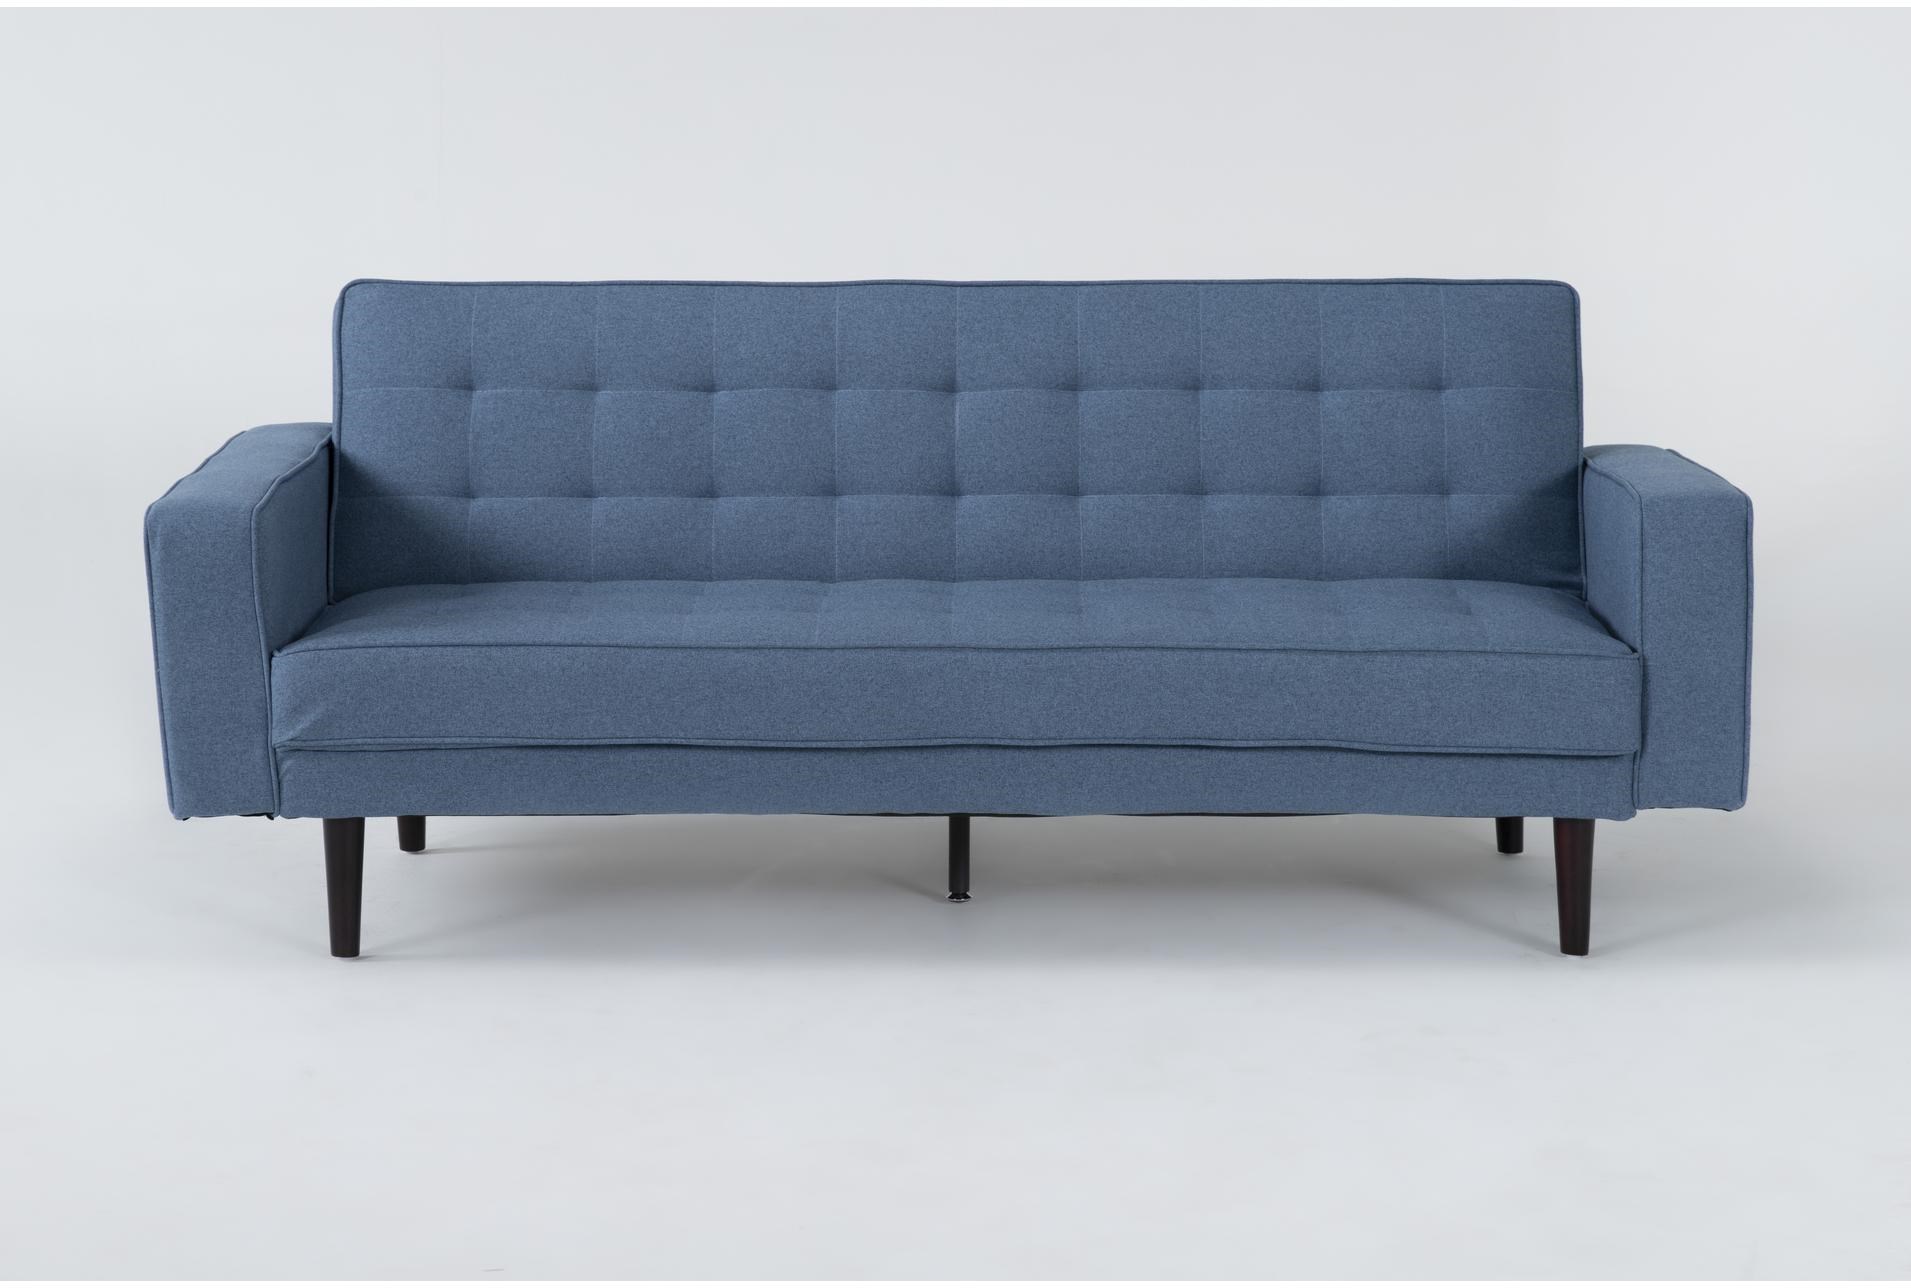 How To Build A Convertible Sofa